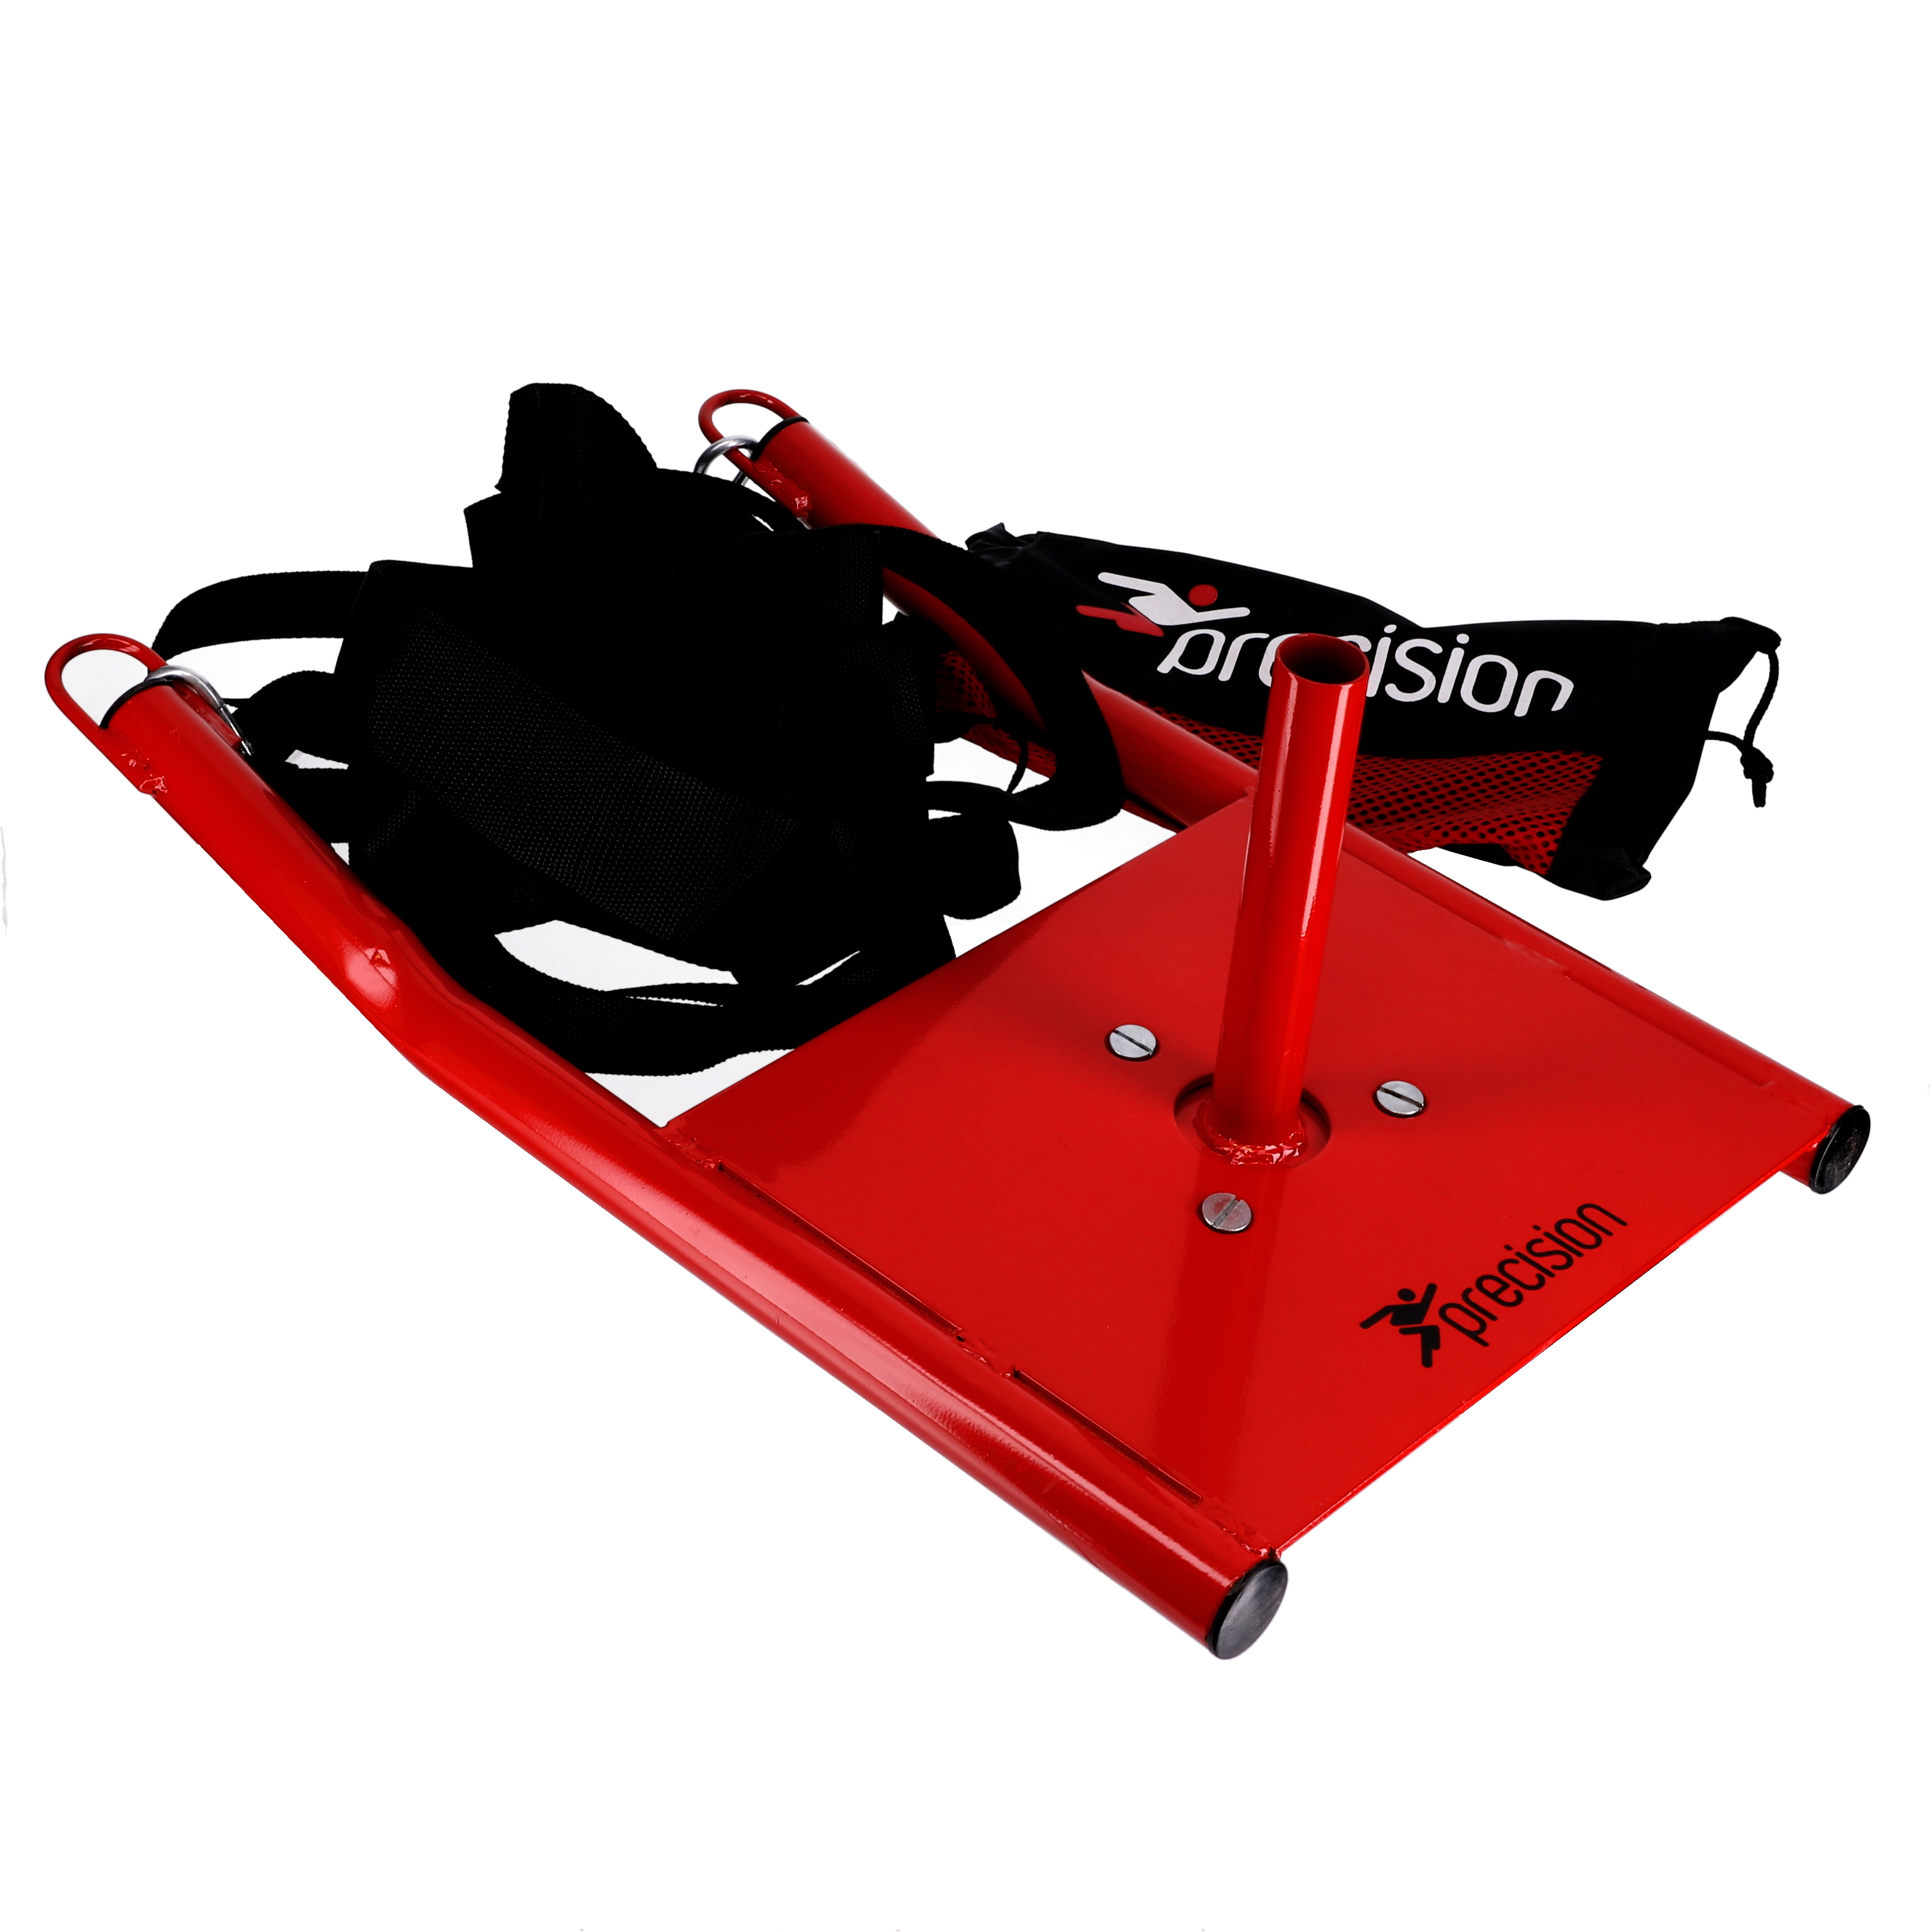 Precision Speed Sled